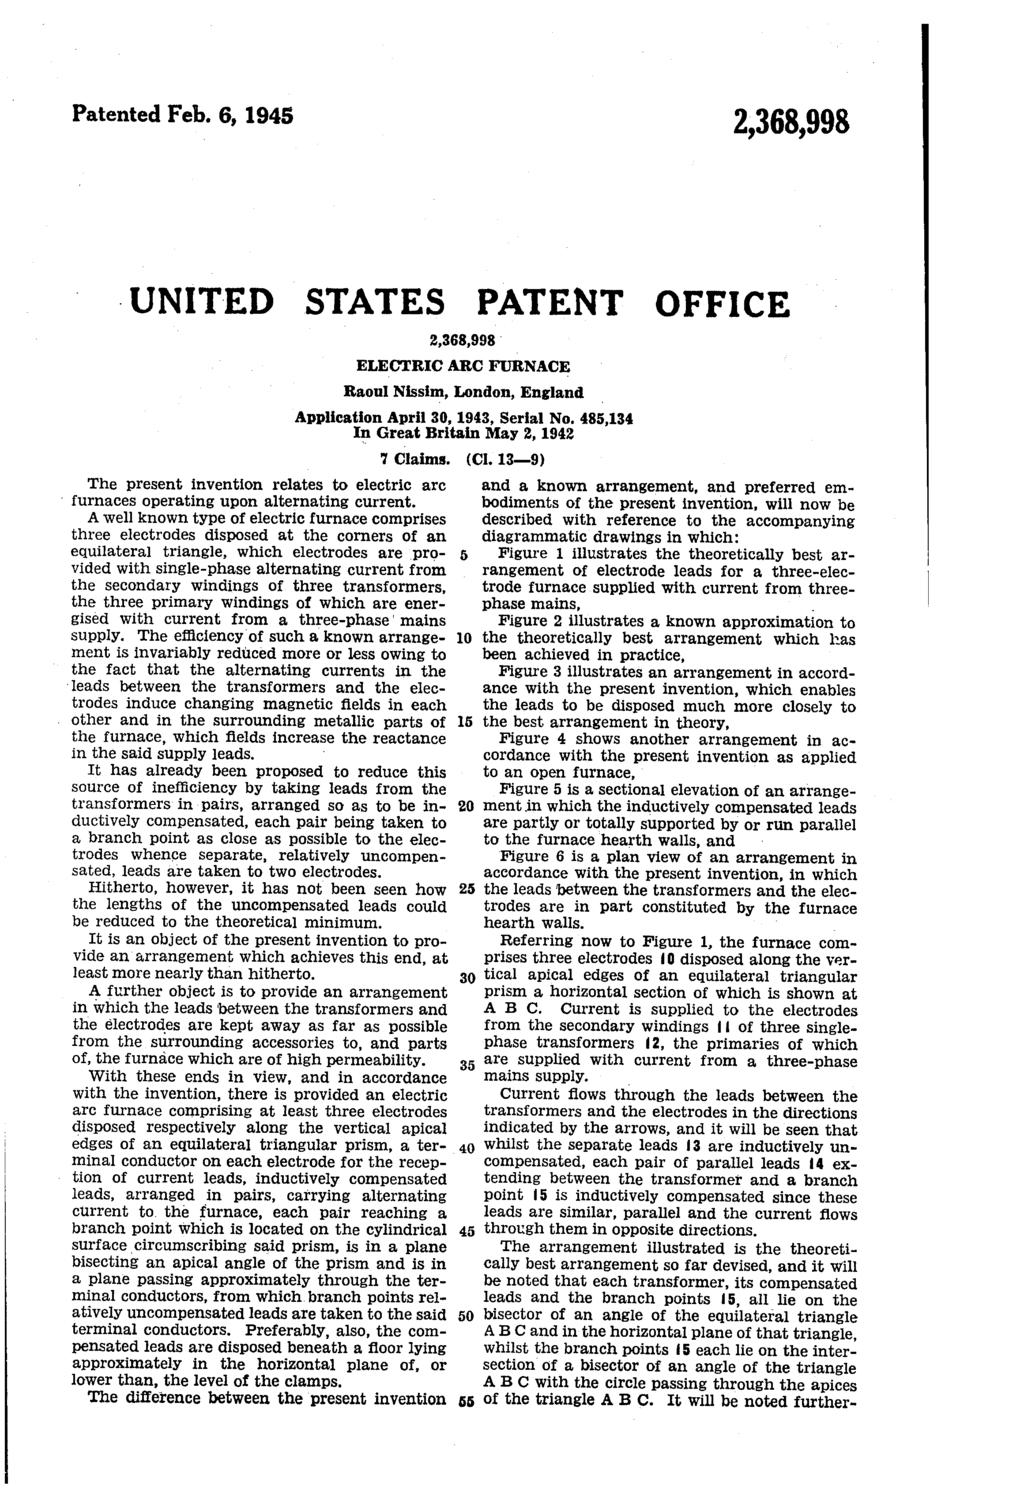 Patented Feb. 6, 1945 UNITED STATES PATENT OFFICE Raoul Nissim, London, England Application April 30, 1943, Serial No.